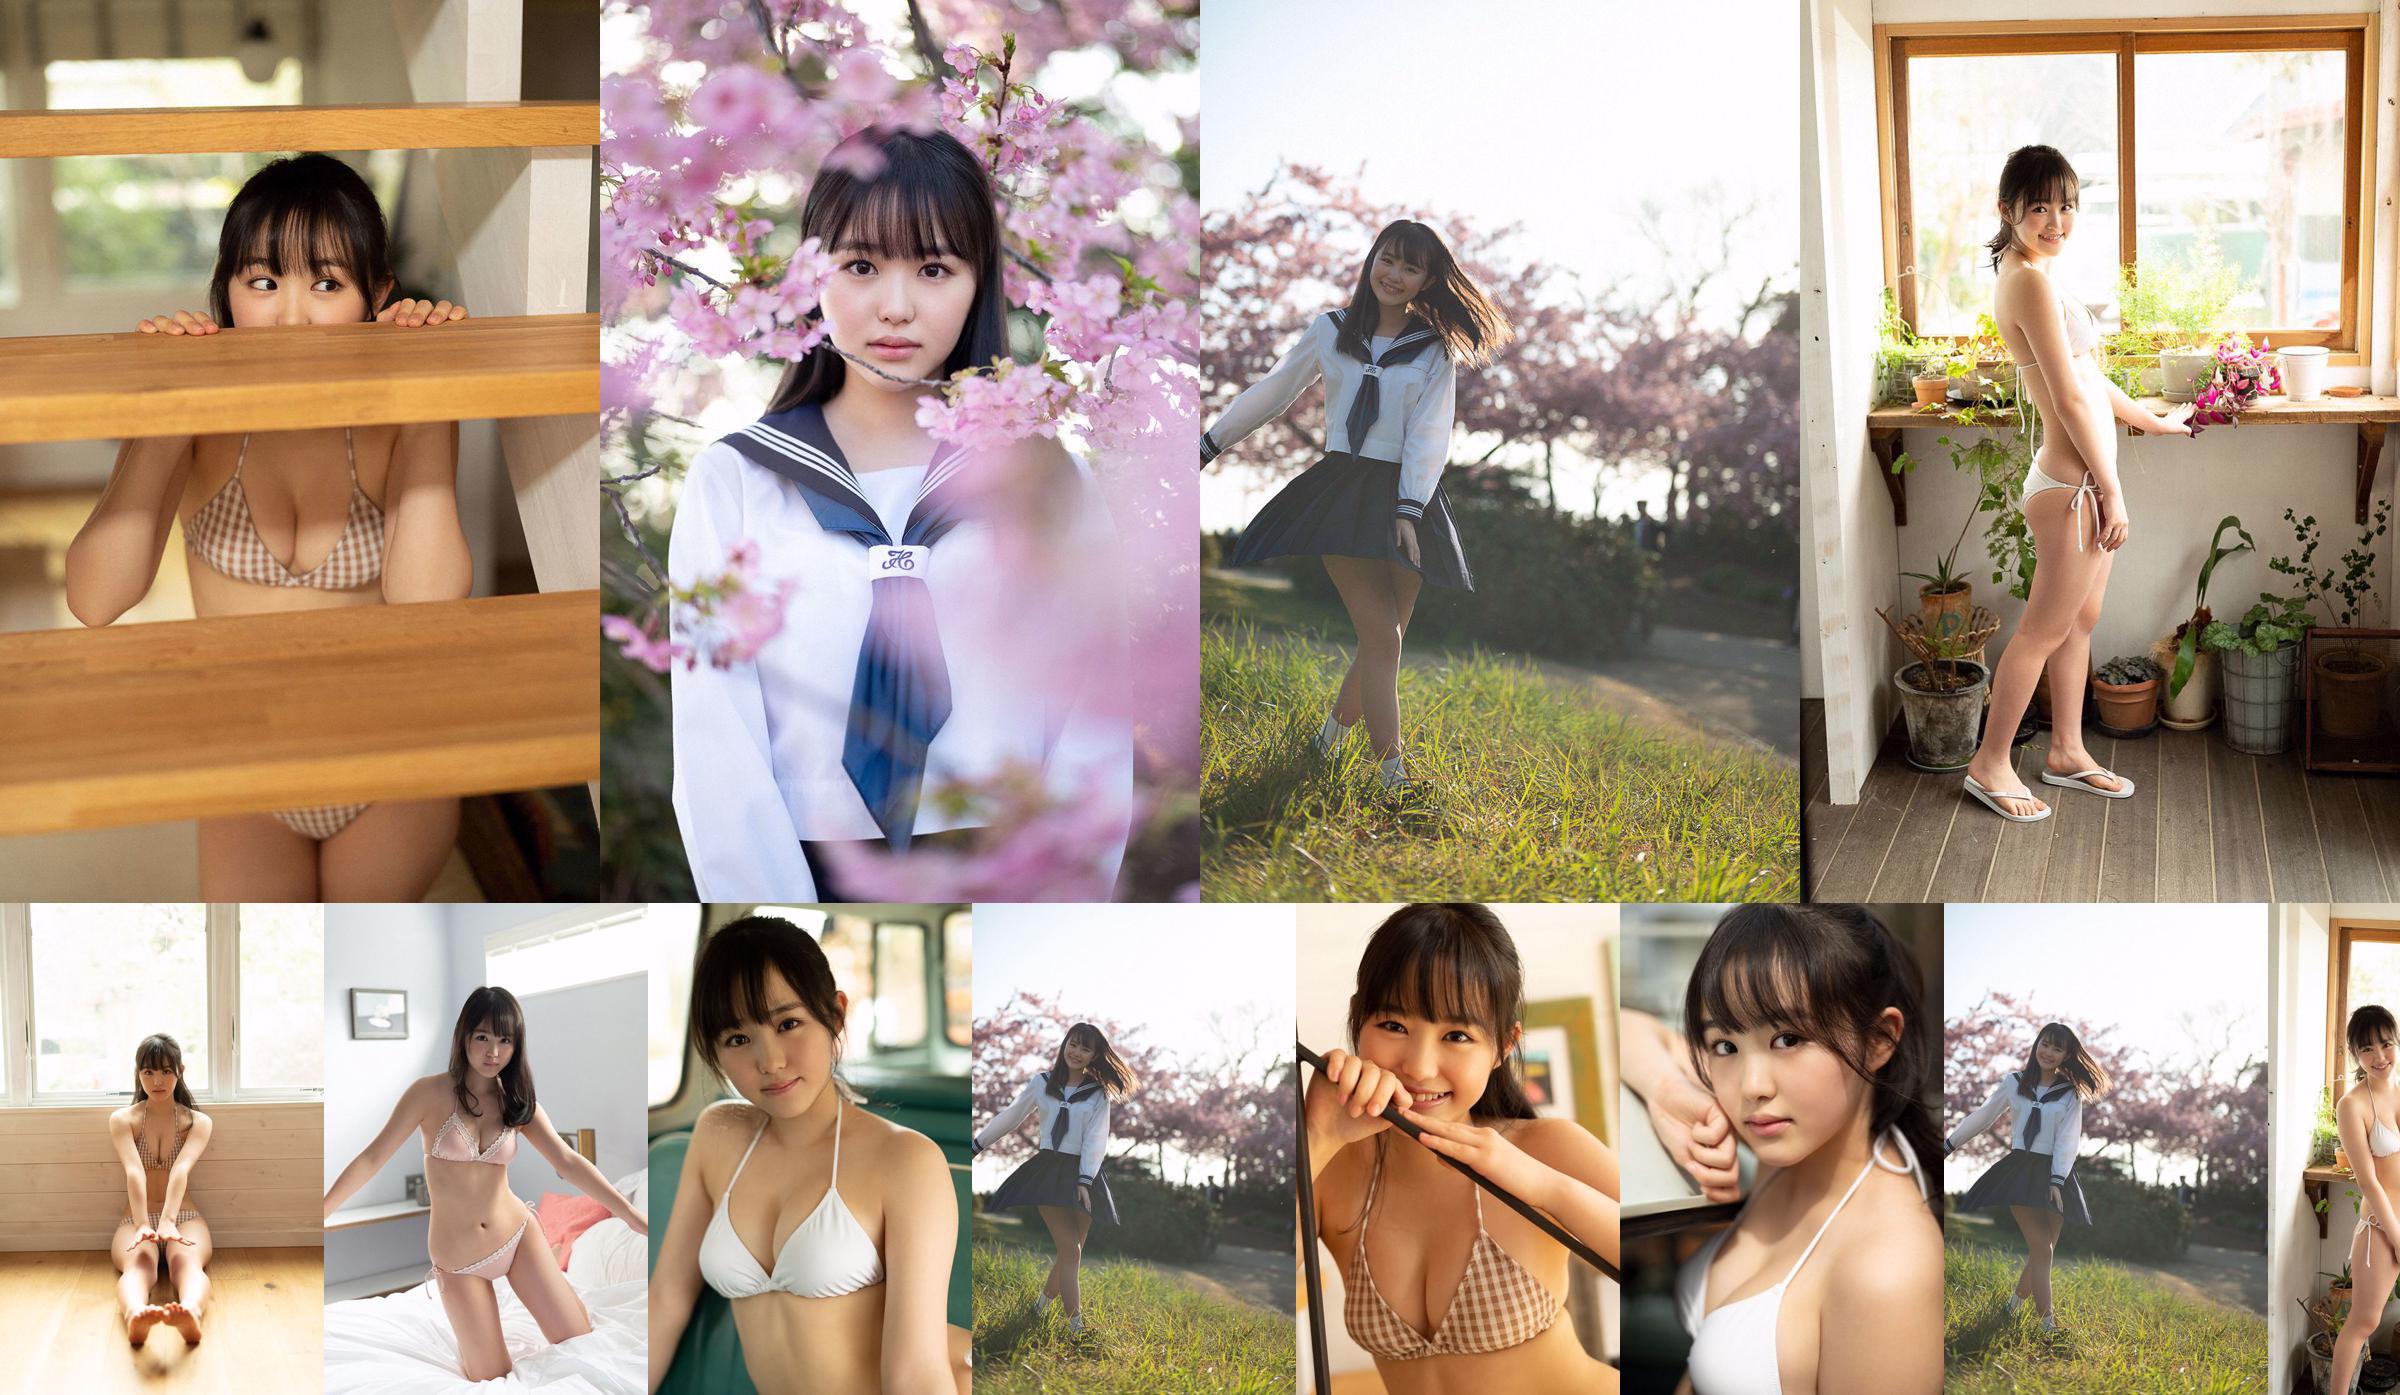 Koharu Ito "Come in Spring." [WPB-net] EXtra810 No.7113b5 Page 1